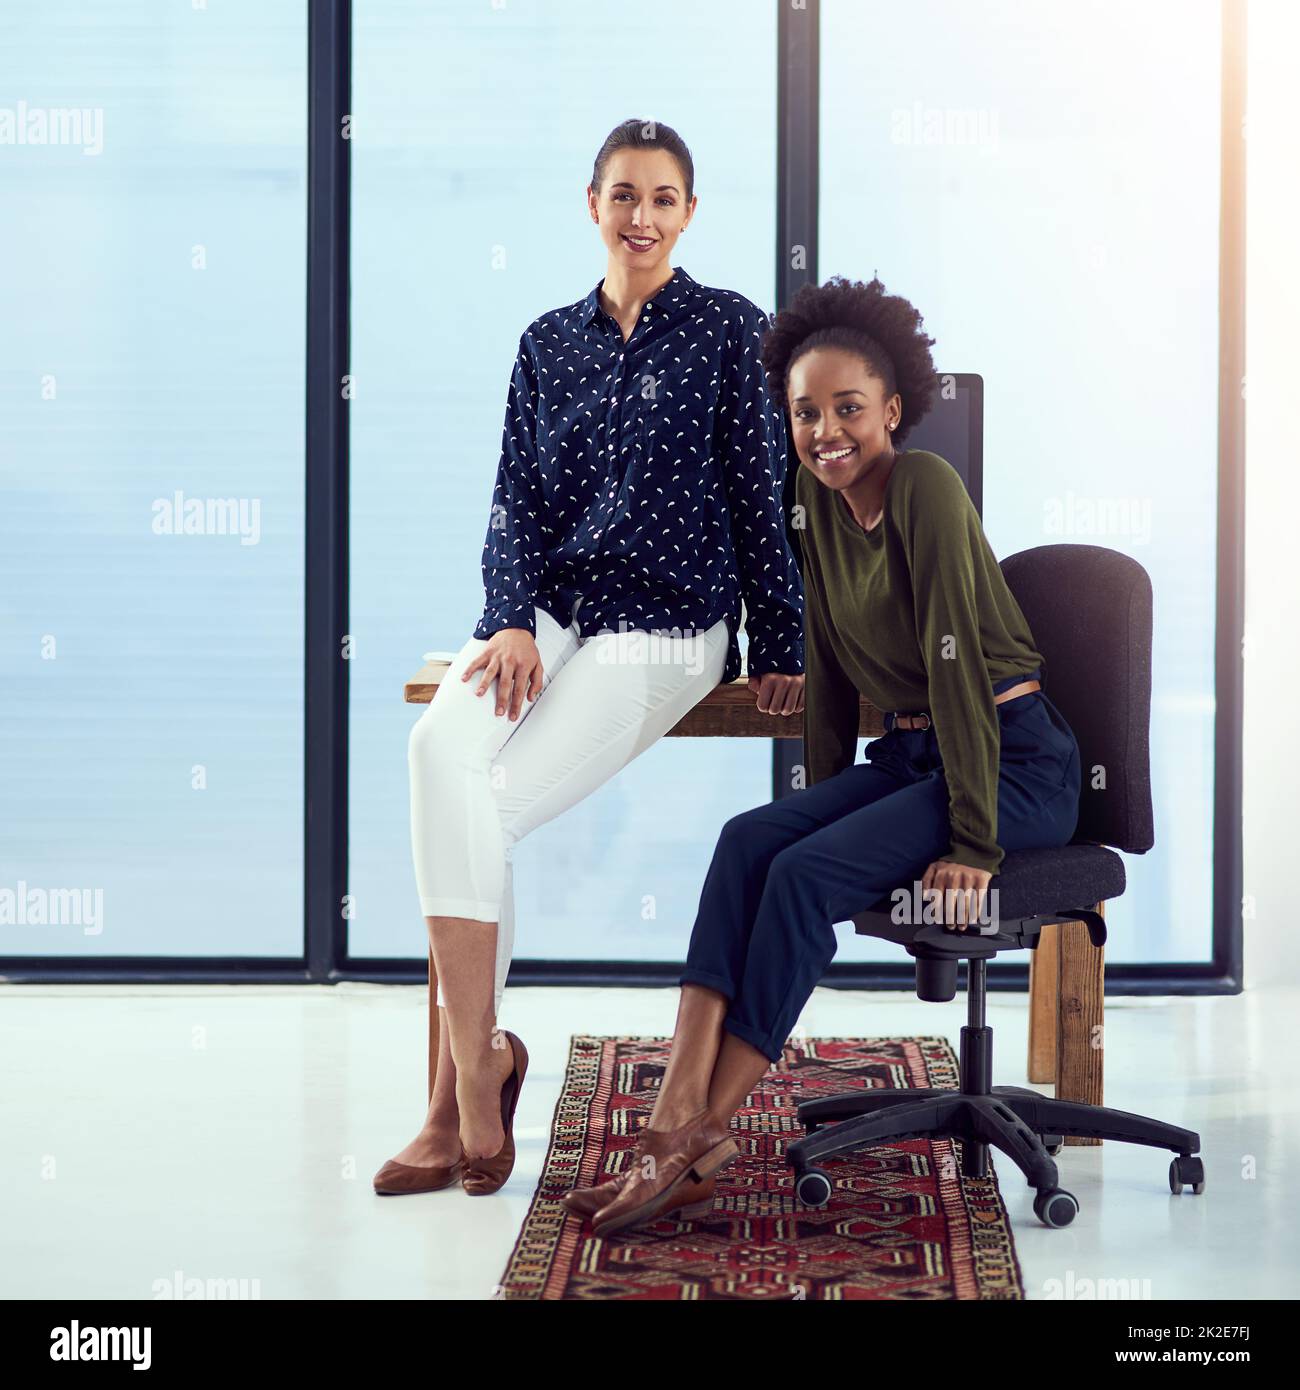 Weve got the job covered. Portrait of two young designers at a work station in front of a window. Stock Photo